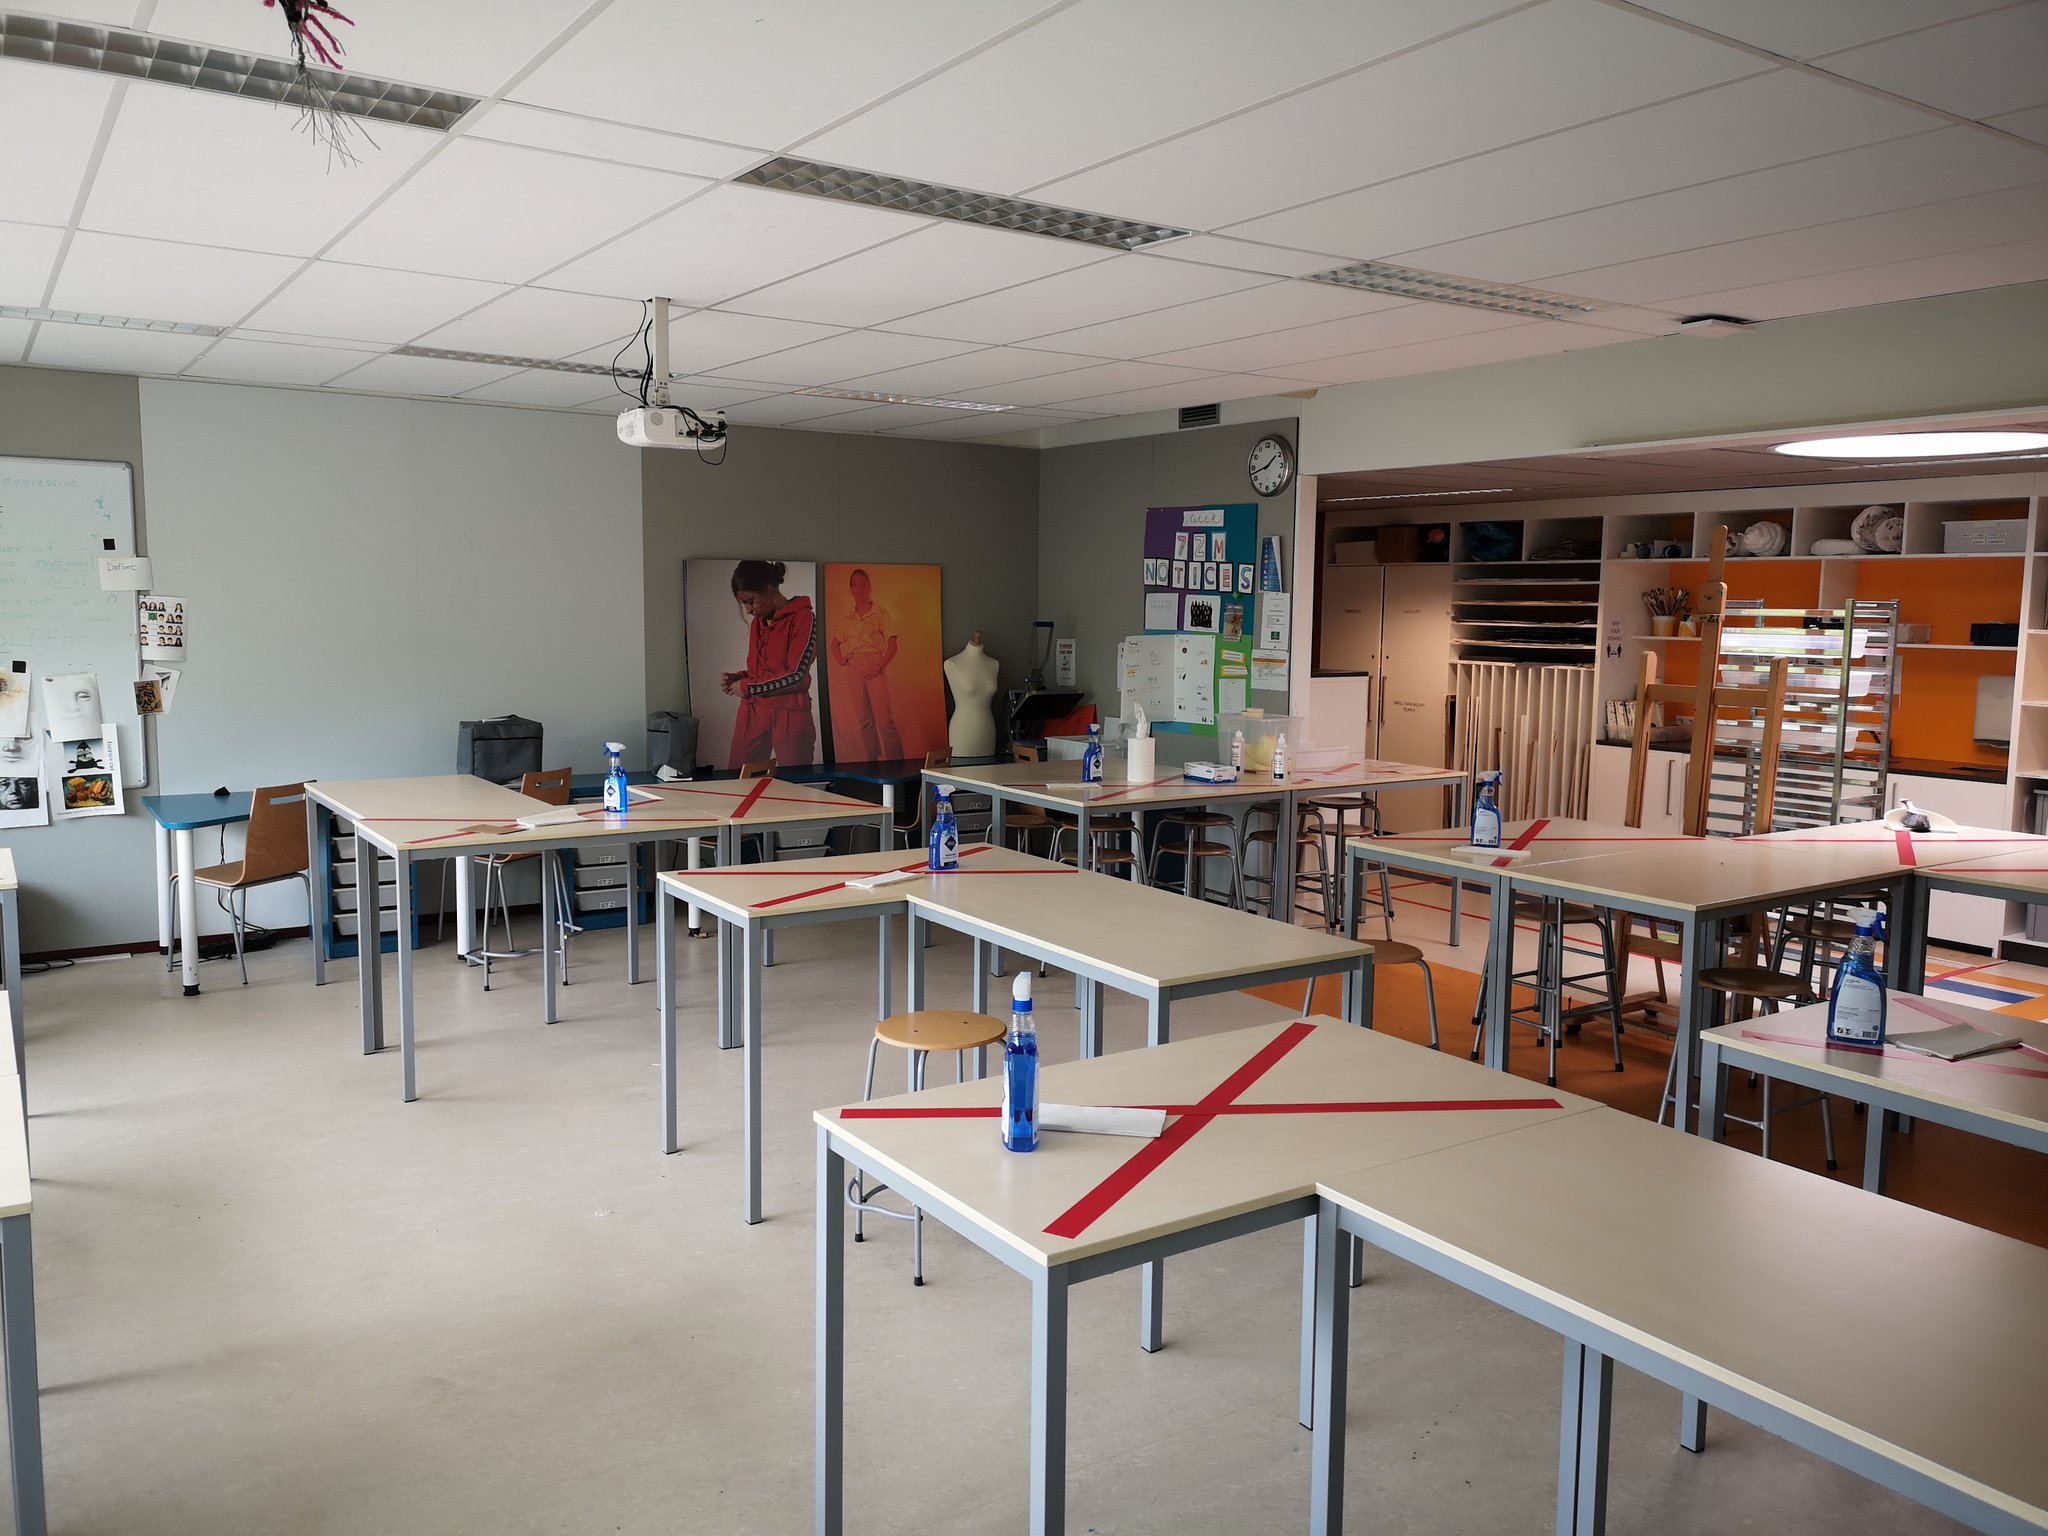 Senior School Art classroom with social distancing measures in place